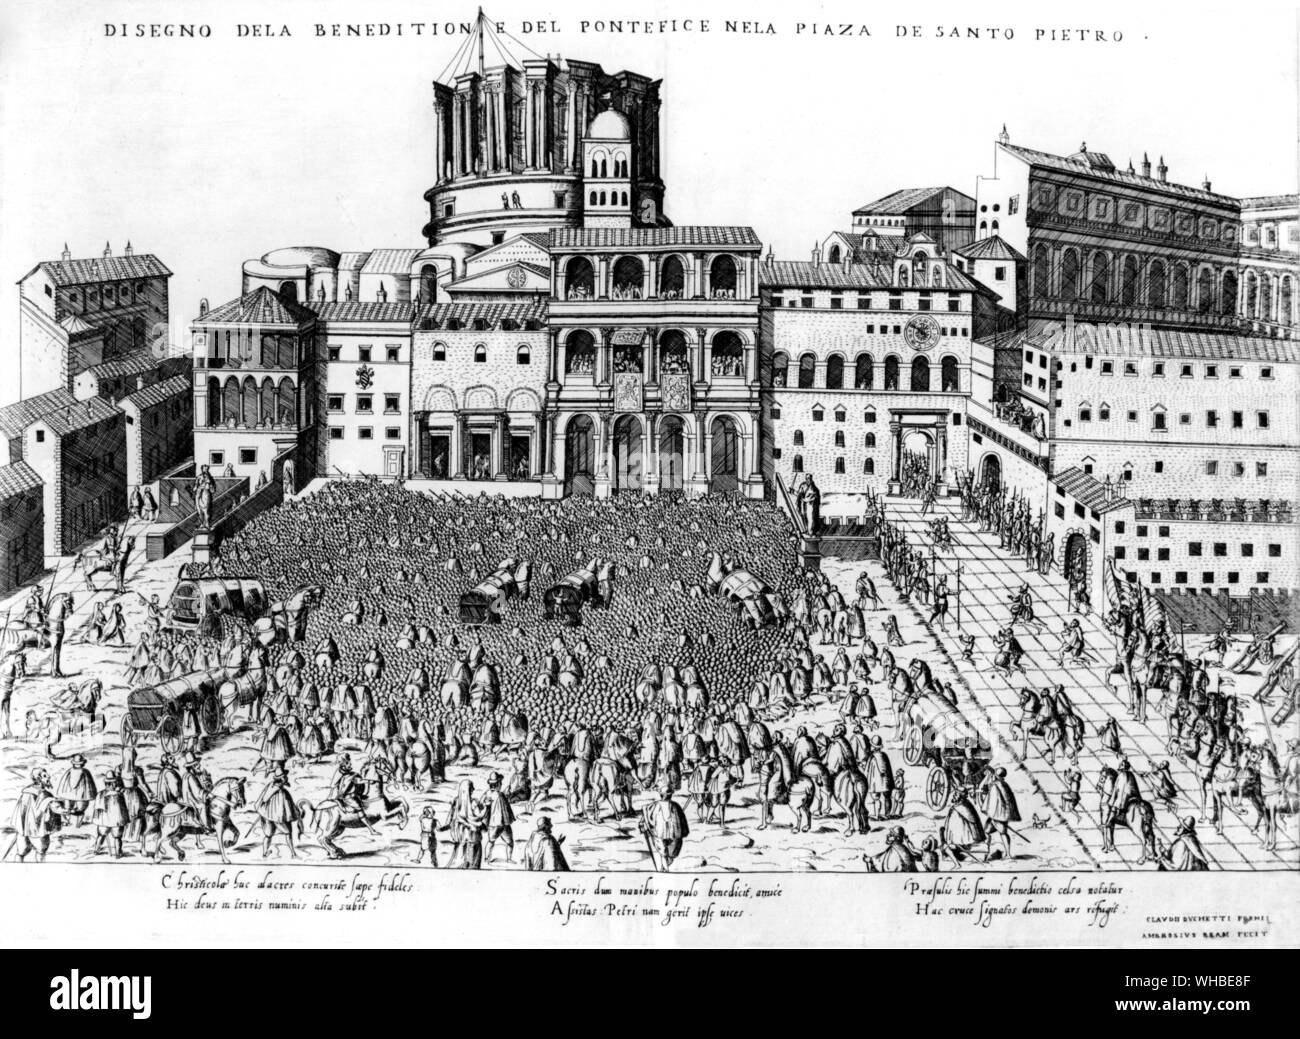 Papal blessing in St Peter's Square in Rome - engraving of 1575 Jubilee from Speculum Romanae Magnificentiae Stock Photo